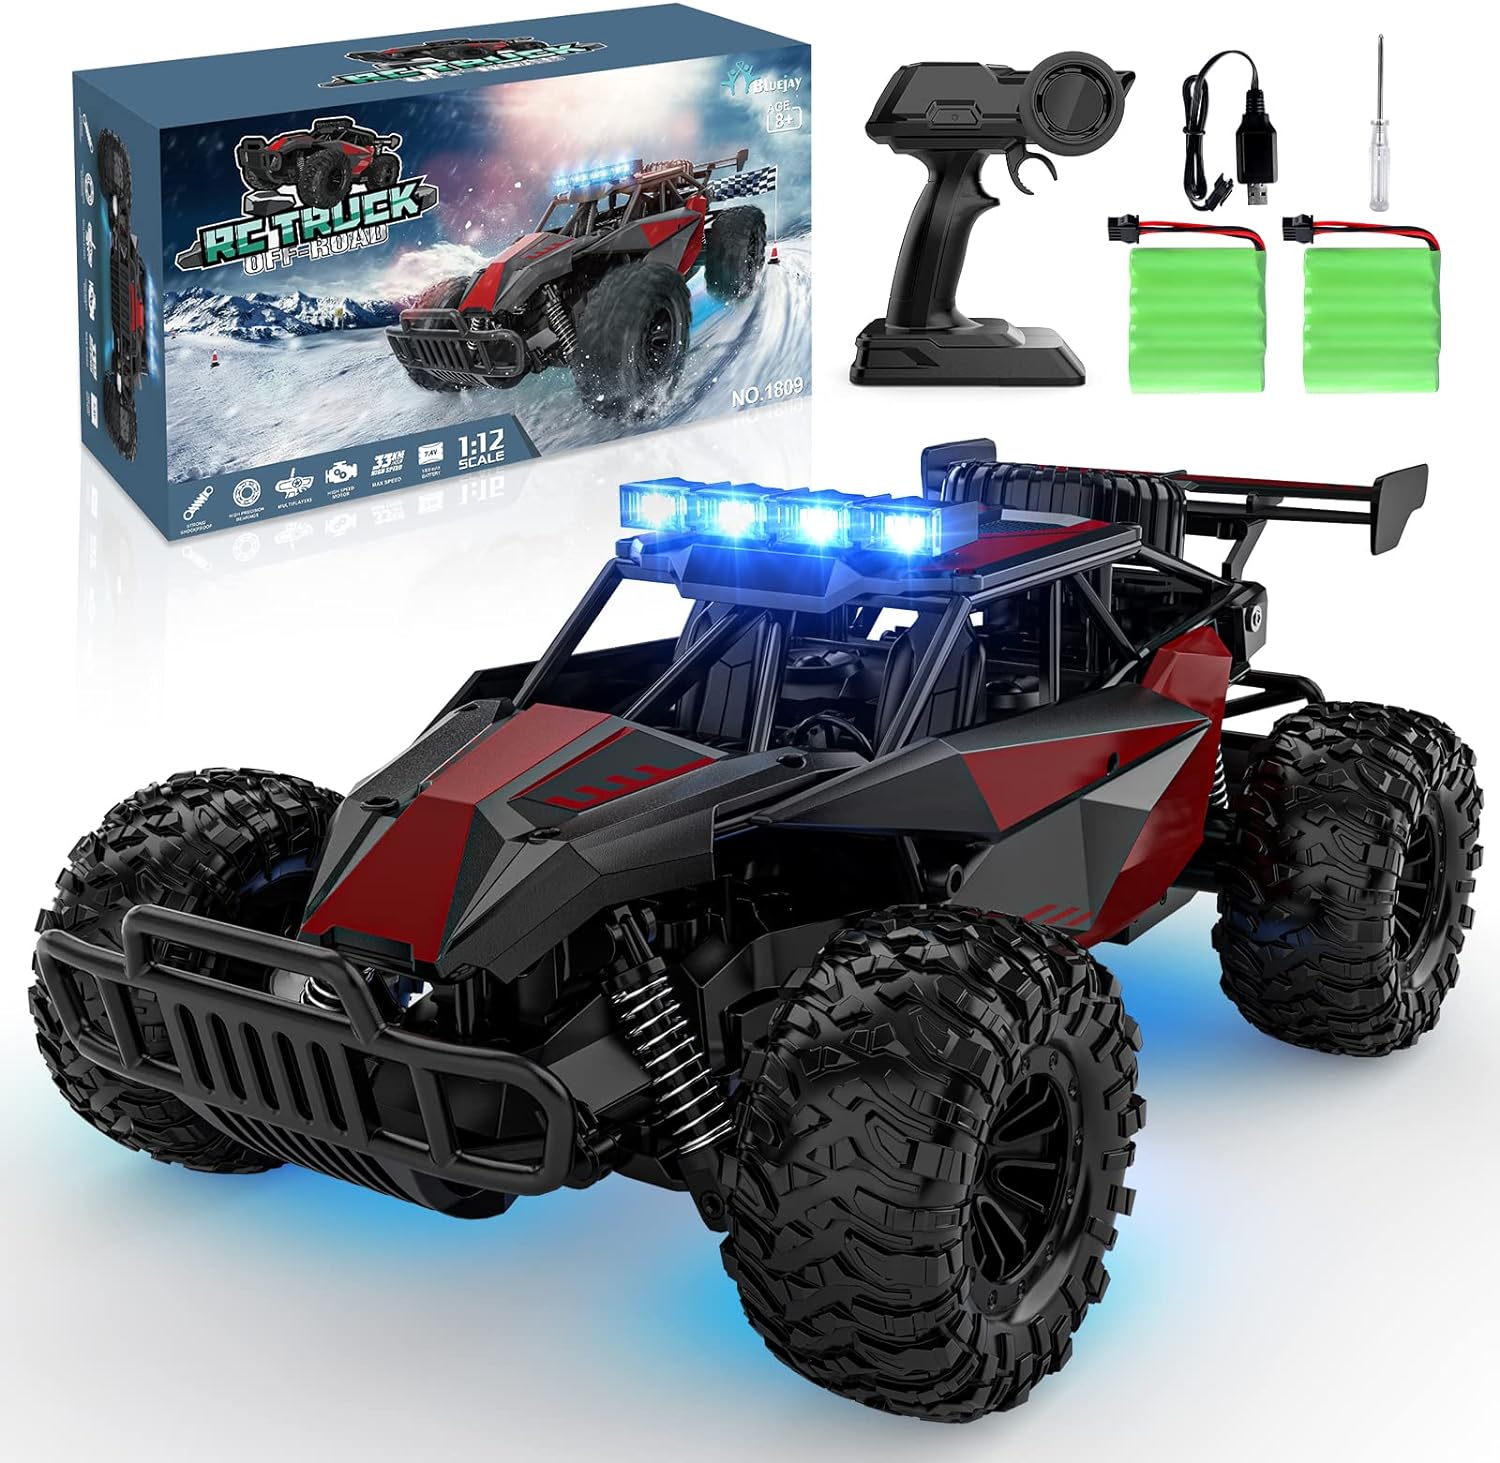 BLUEJAY Remote Control Car - 2.4GHz High Speed 33KM/H RC Cars Toys, 1:12 Monster RC Truck Off Road Hobby Toys with LED Headlight and Rechargeable Battery Gifts for Adults Boys 8-12 Kids